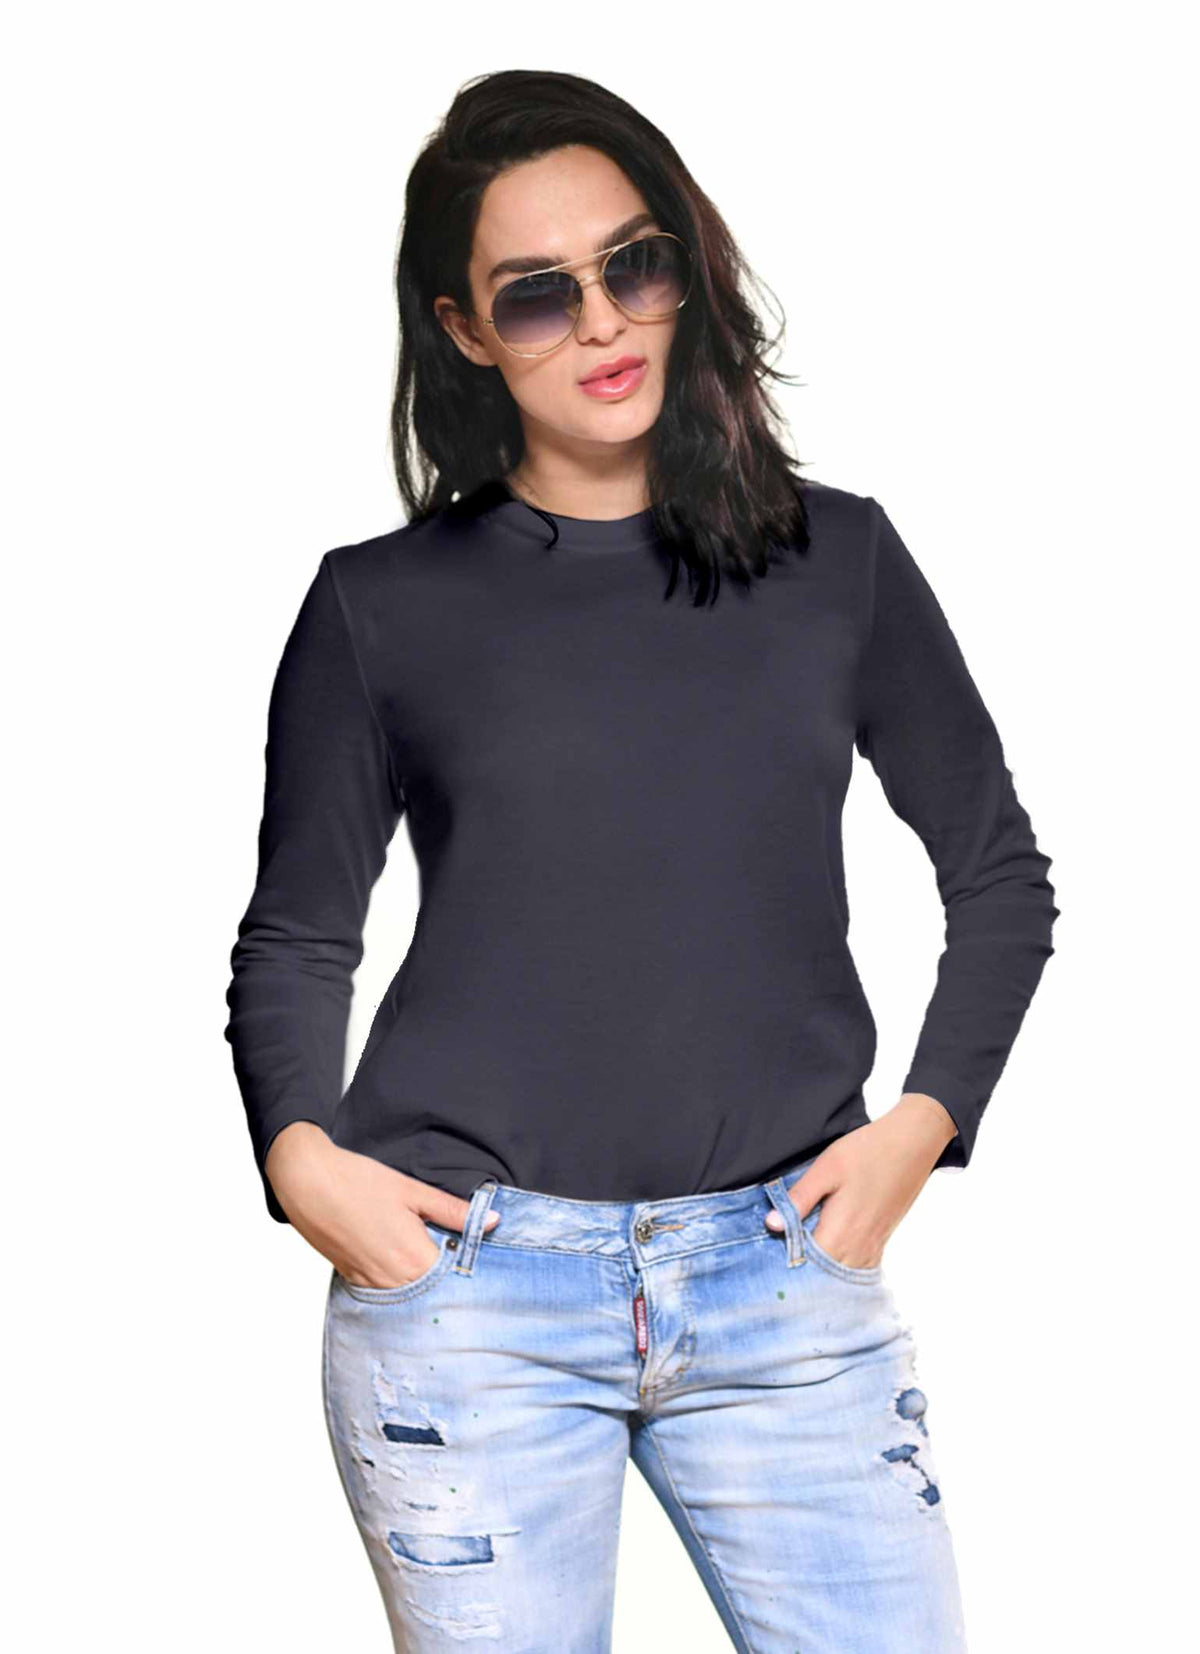 Carmen Sol long sleeve tee with round neck in color mid night blue